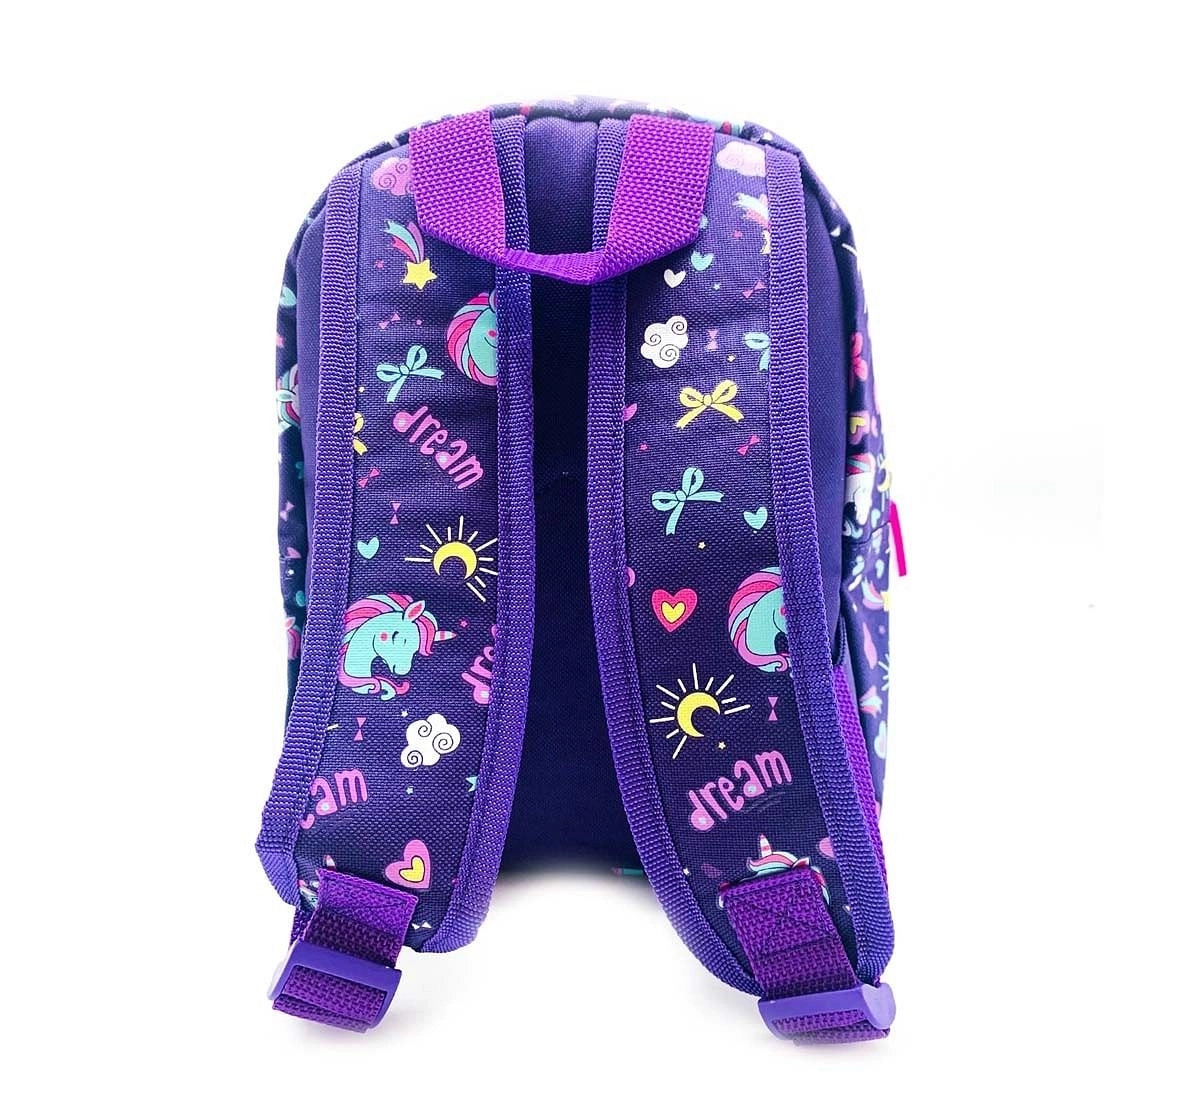 Hamster London Straight Fire Backpack Small Unicorn Bags for Kids Age 3Y+ (Purple)